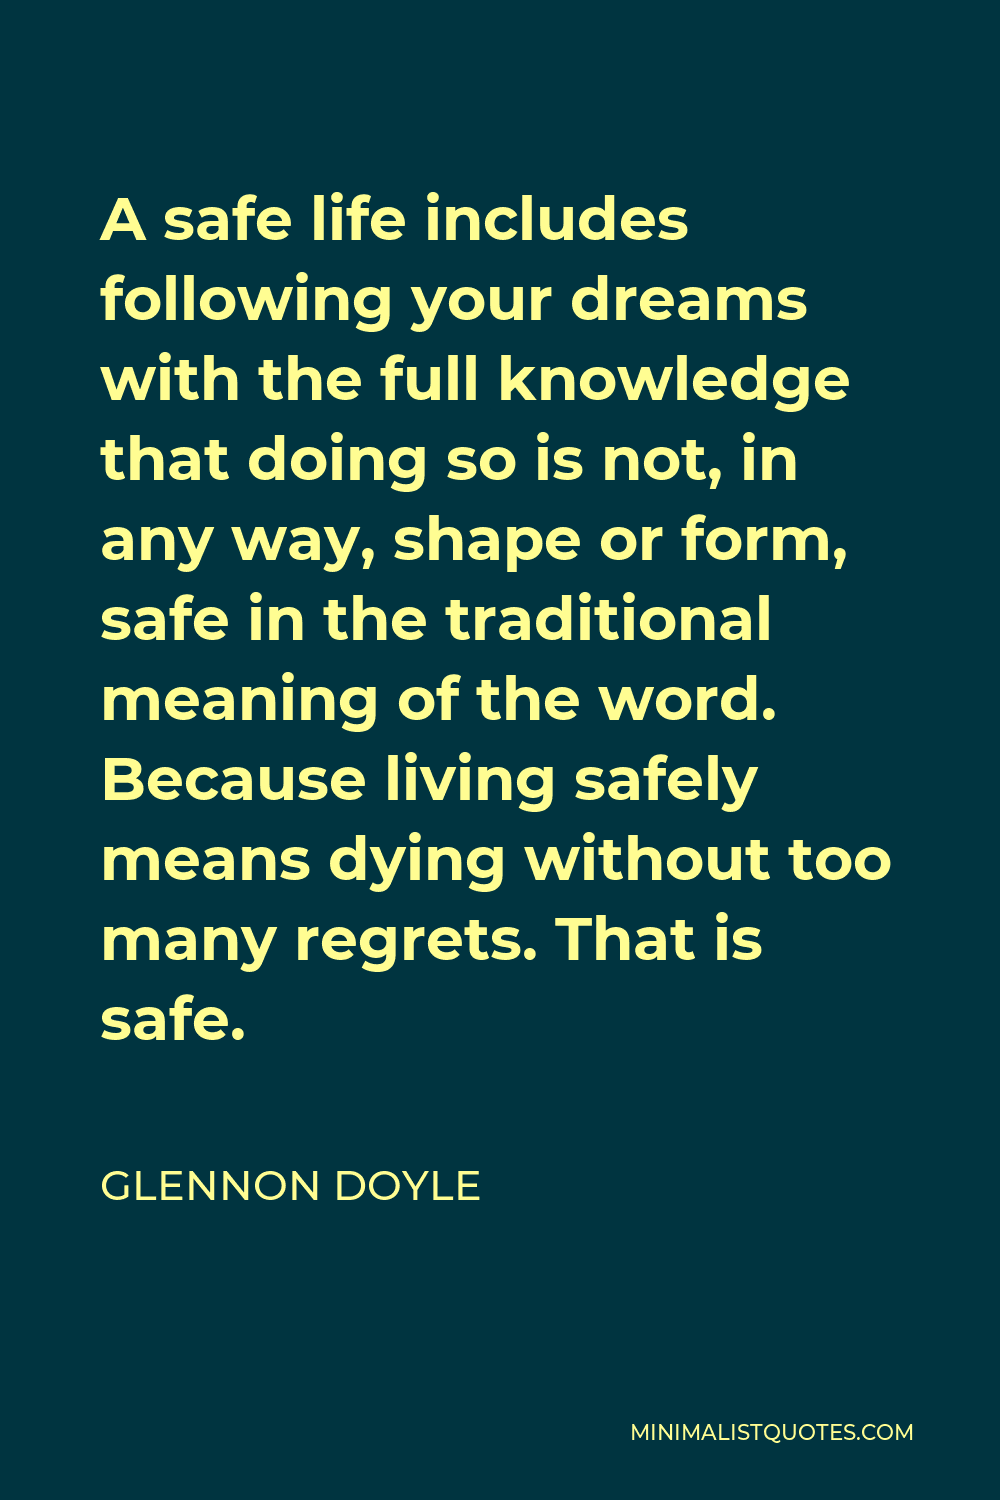 Glennon Doyle Quote - A safe life includes following your dreams with the full knowledge that doing so is not, in any way, shape or form, safe in the traditional meaning of the word. Because living safely means dying without too many regrets. That is safe.